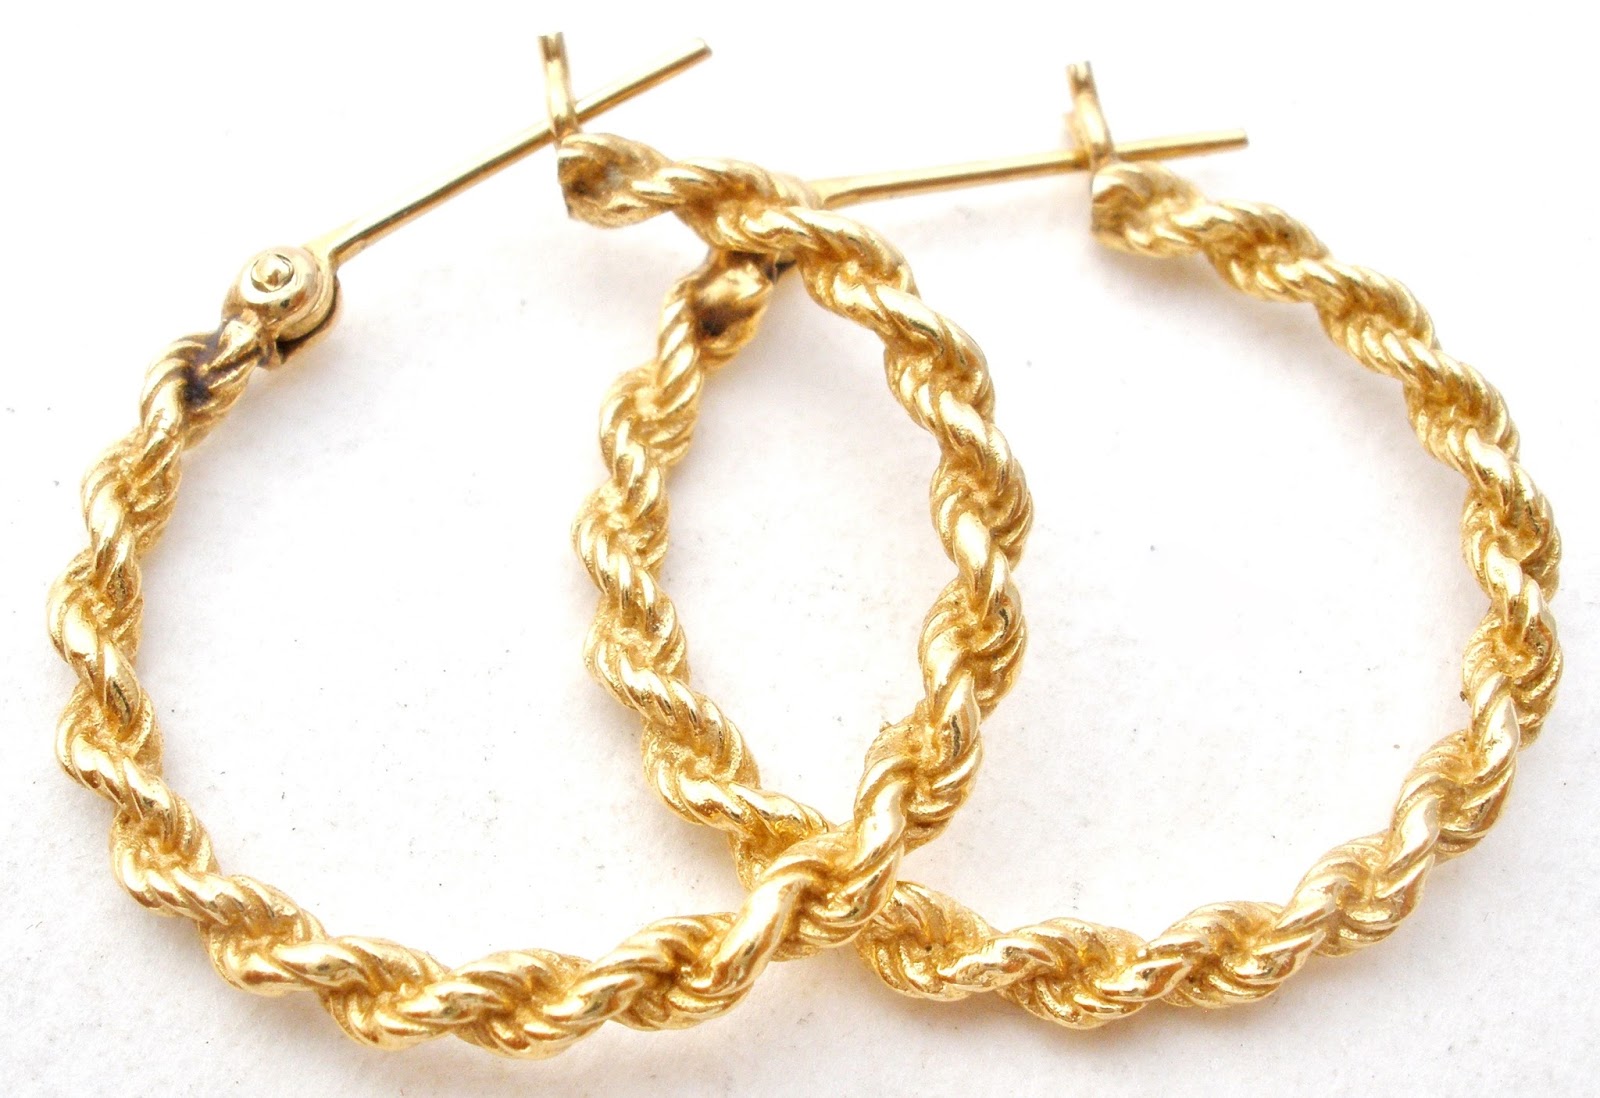 The Jewelry Lady's Store: 14K Gold Hoop Earrings with a Twisted Design